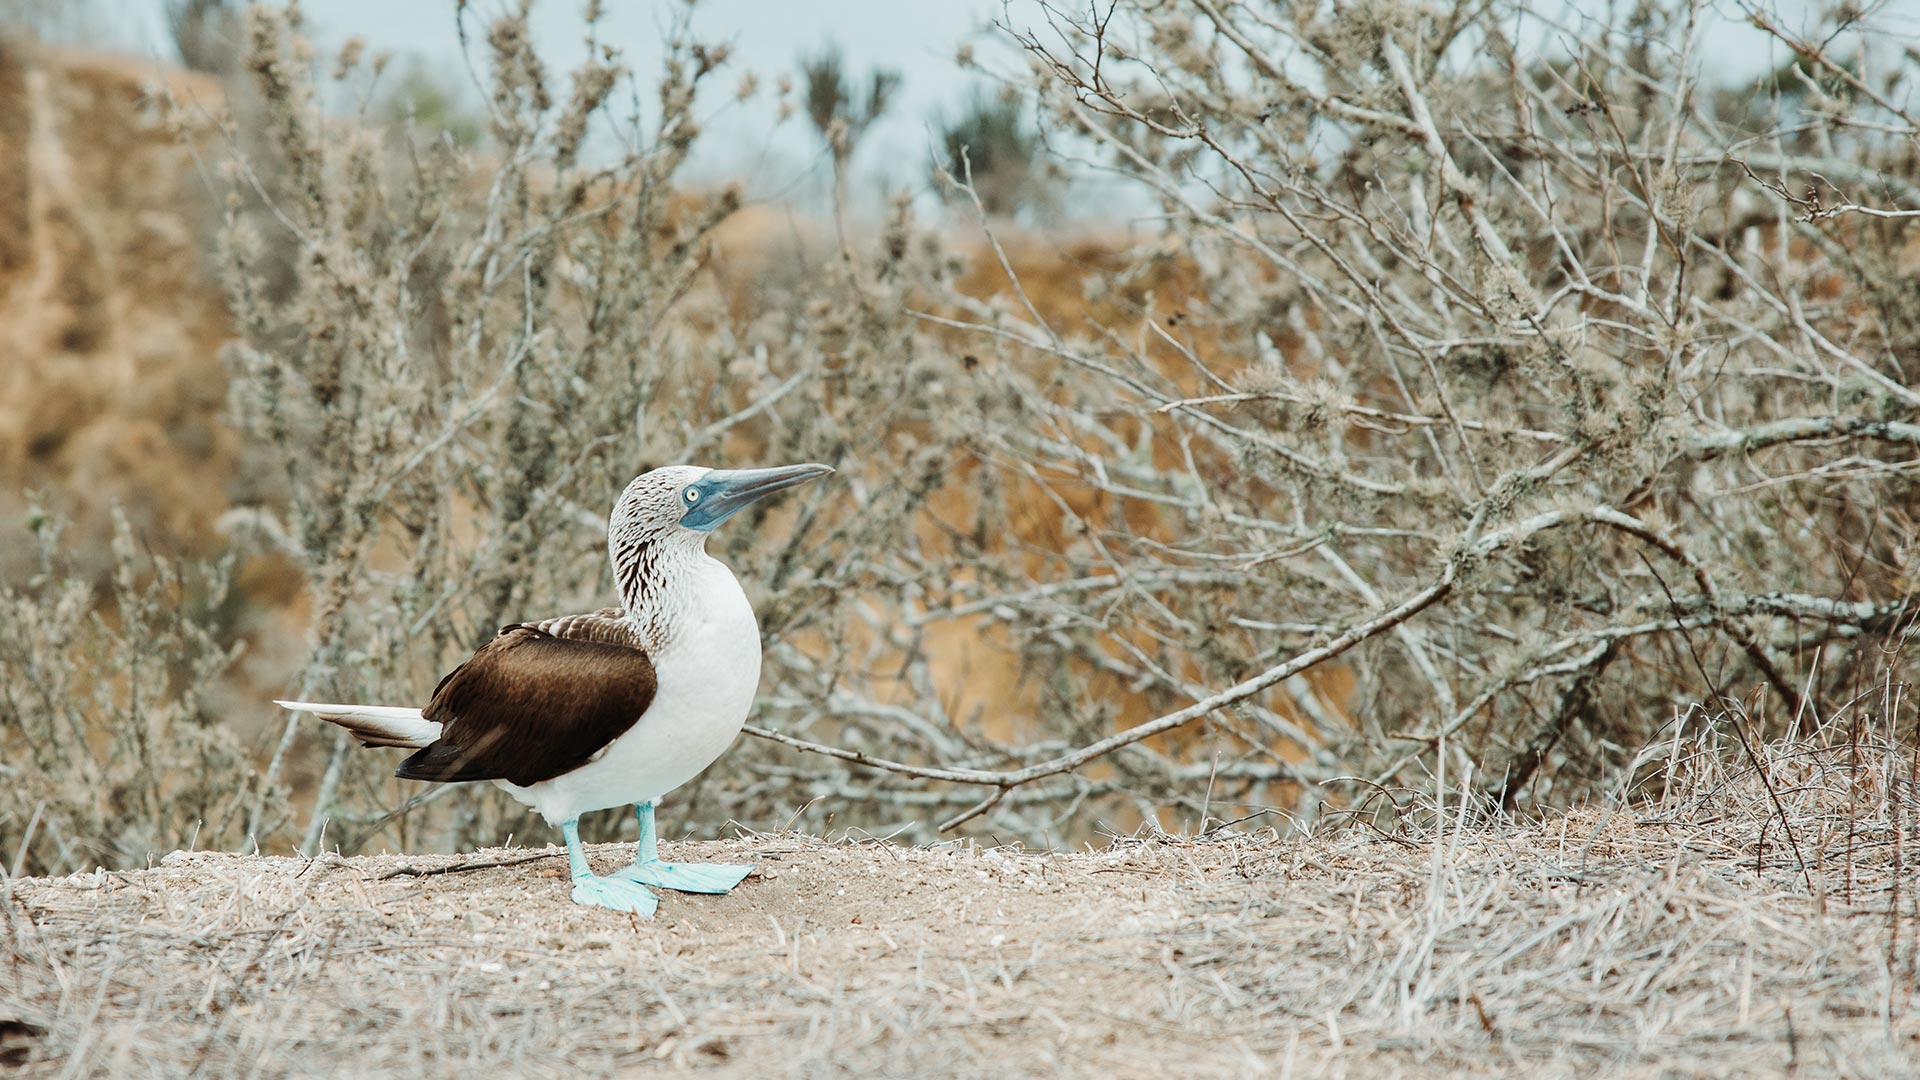 A Blue-footed Booby in the dry forest of Isla de La Plata, during our whale watching tour from Puerto López, Ecuador. | Impactful Travel